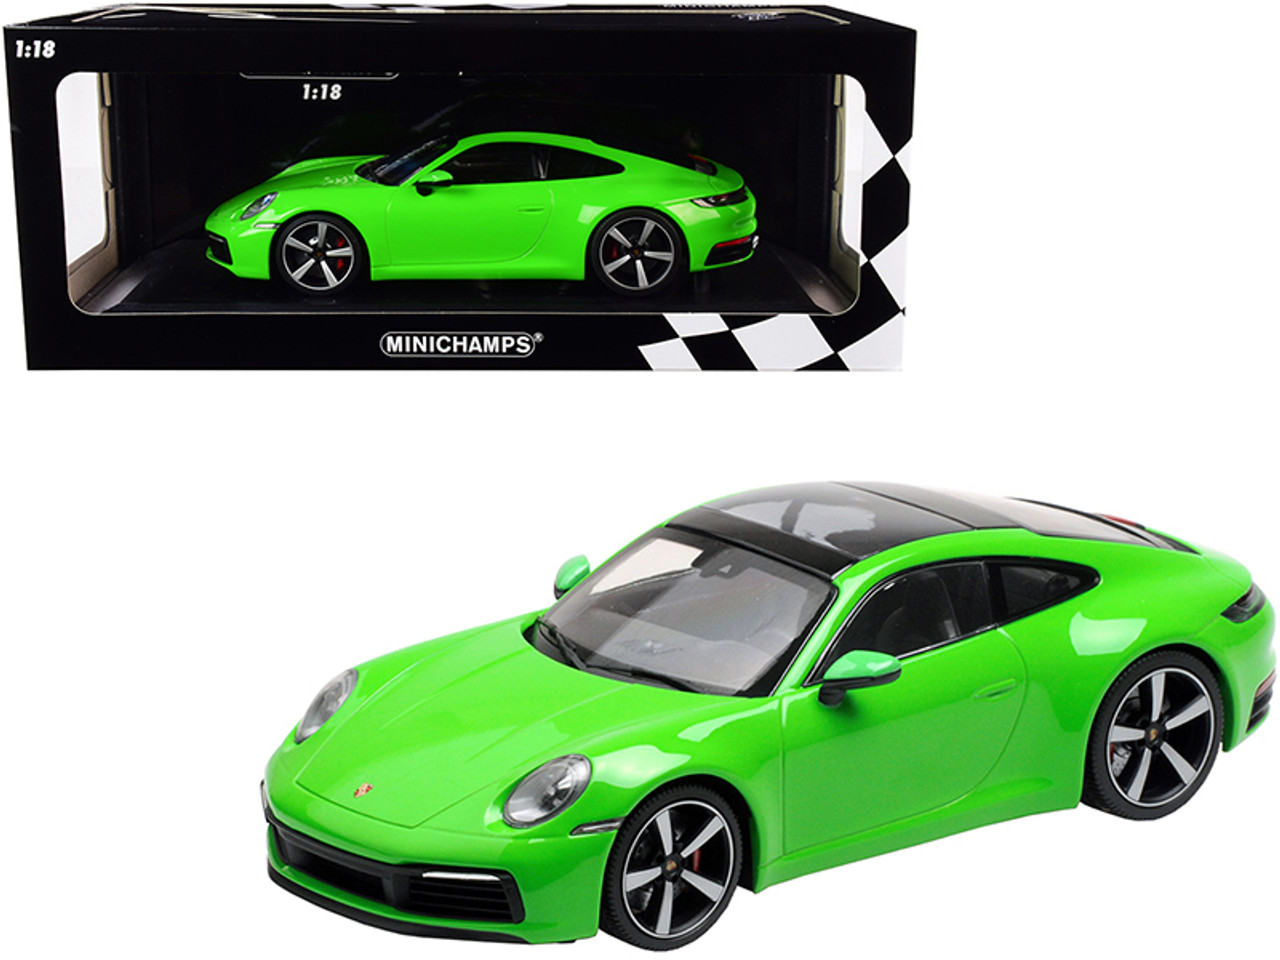 2019 Porsche 911 Carrera 4S Bright Green Limited Edition to 312 pieces Worldwide 1/18 Diecast Model Car by Minichamps